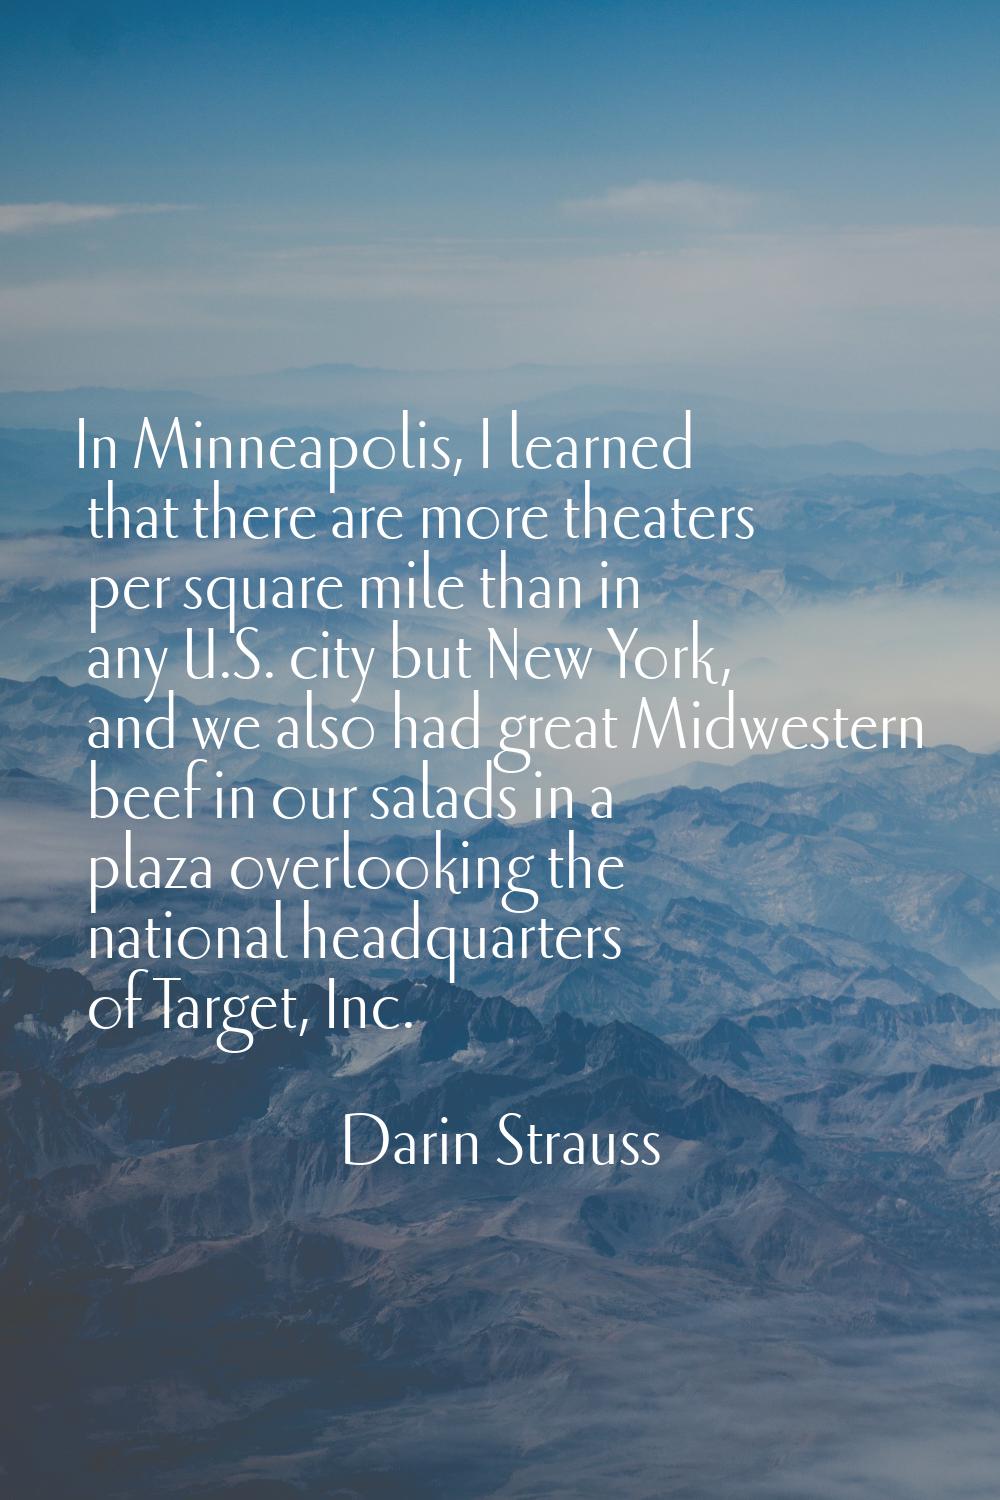 In Minneapolis, I learned that there are more theaters per square mile than in any U.S. city but Ne